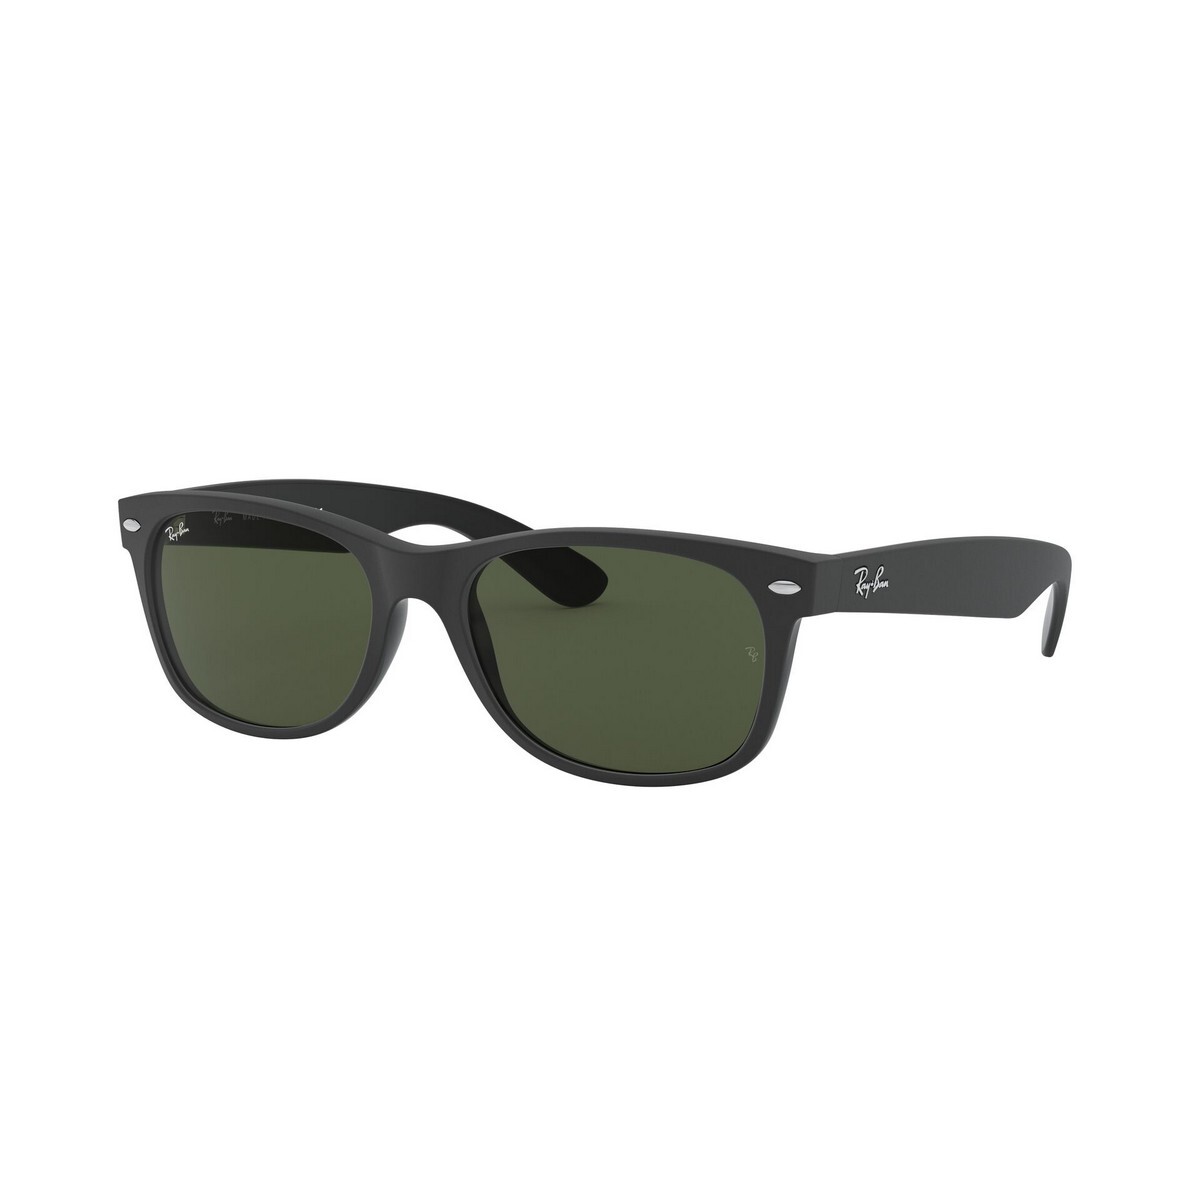 Rayban Unisex Top Rubber Black On Shiny Black Frame With Green Lens Sunglass